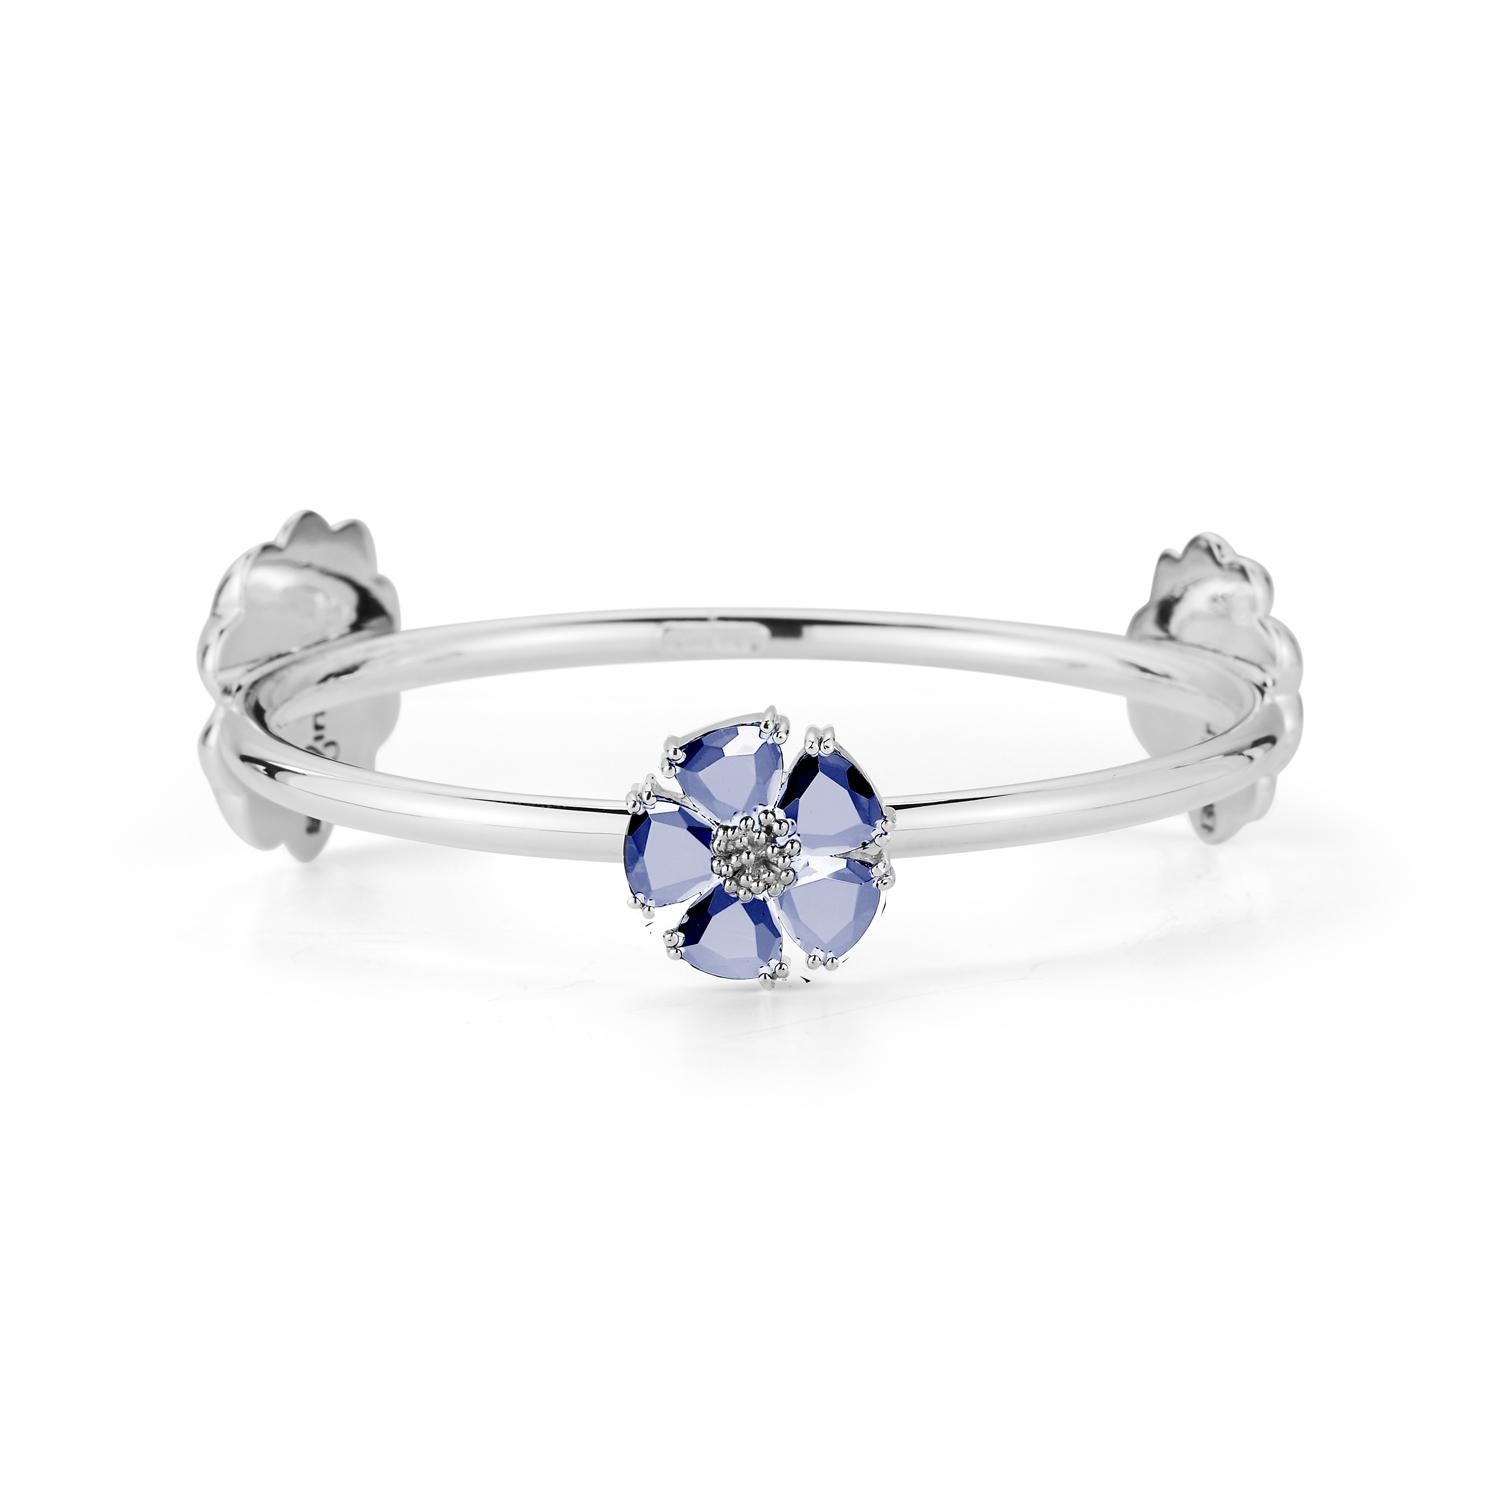 Designed in NYC

.925 Sterling Silver 5 x 7 mm Black Sapphire Mixed Blossom Stone Bangle. No matter the season, allow natural beauty to surround you wherever you go. Mixed blossom stone bangle: 

Sterling silver 
High-polish finish
Medium-weight 
3D